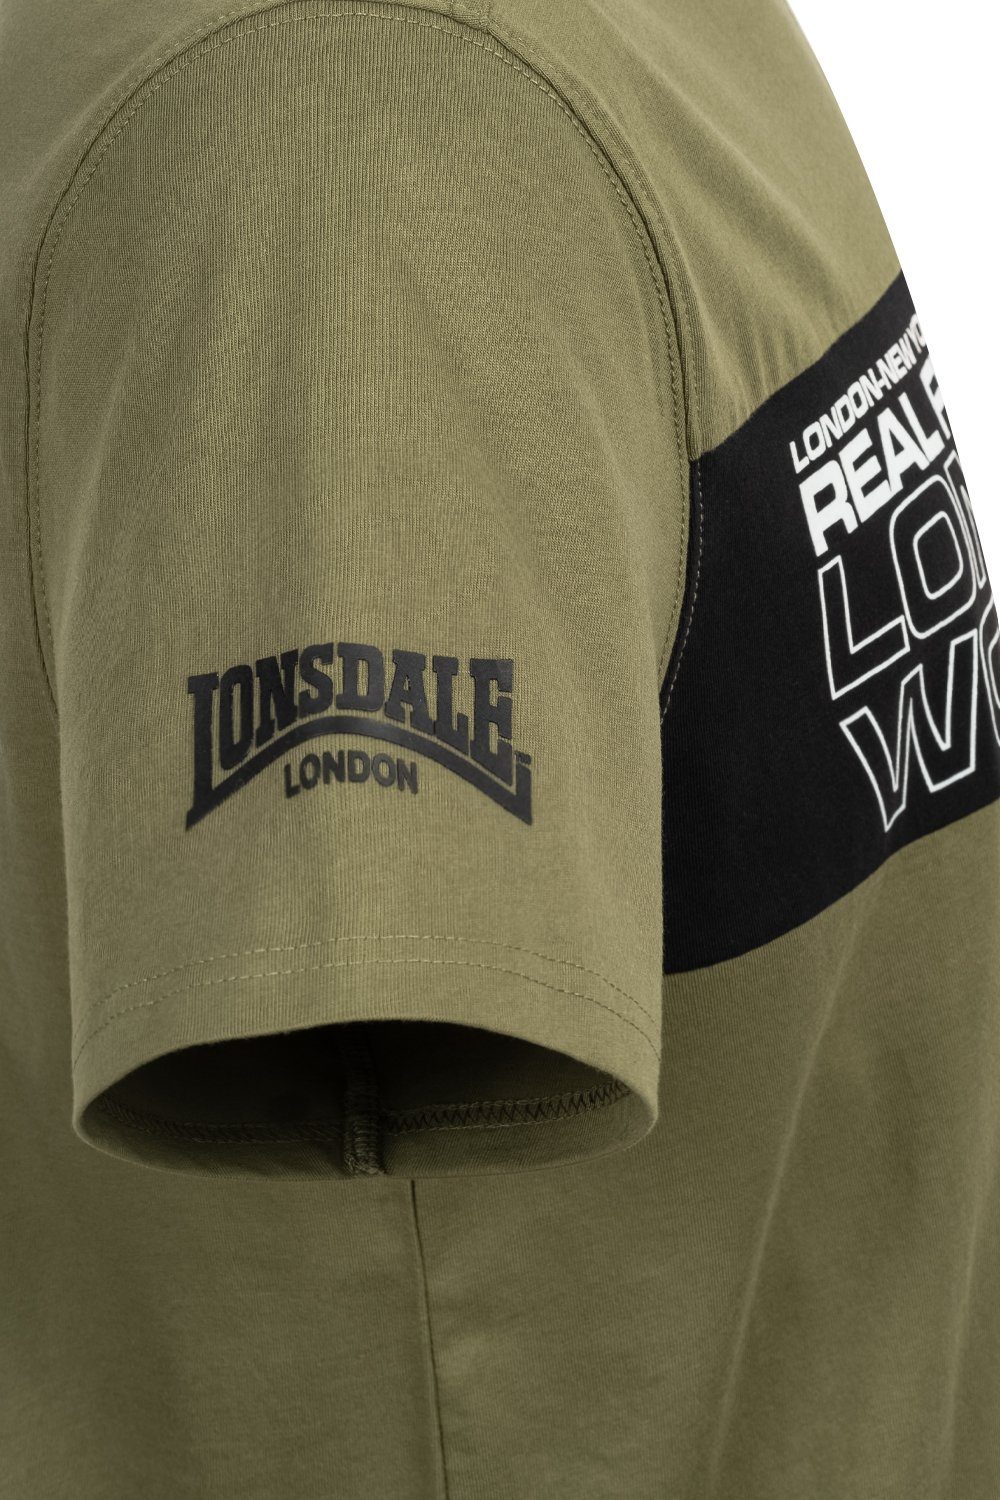 OTTERSTON Lonsdale T-Shirt